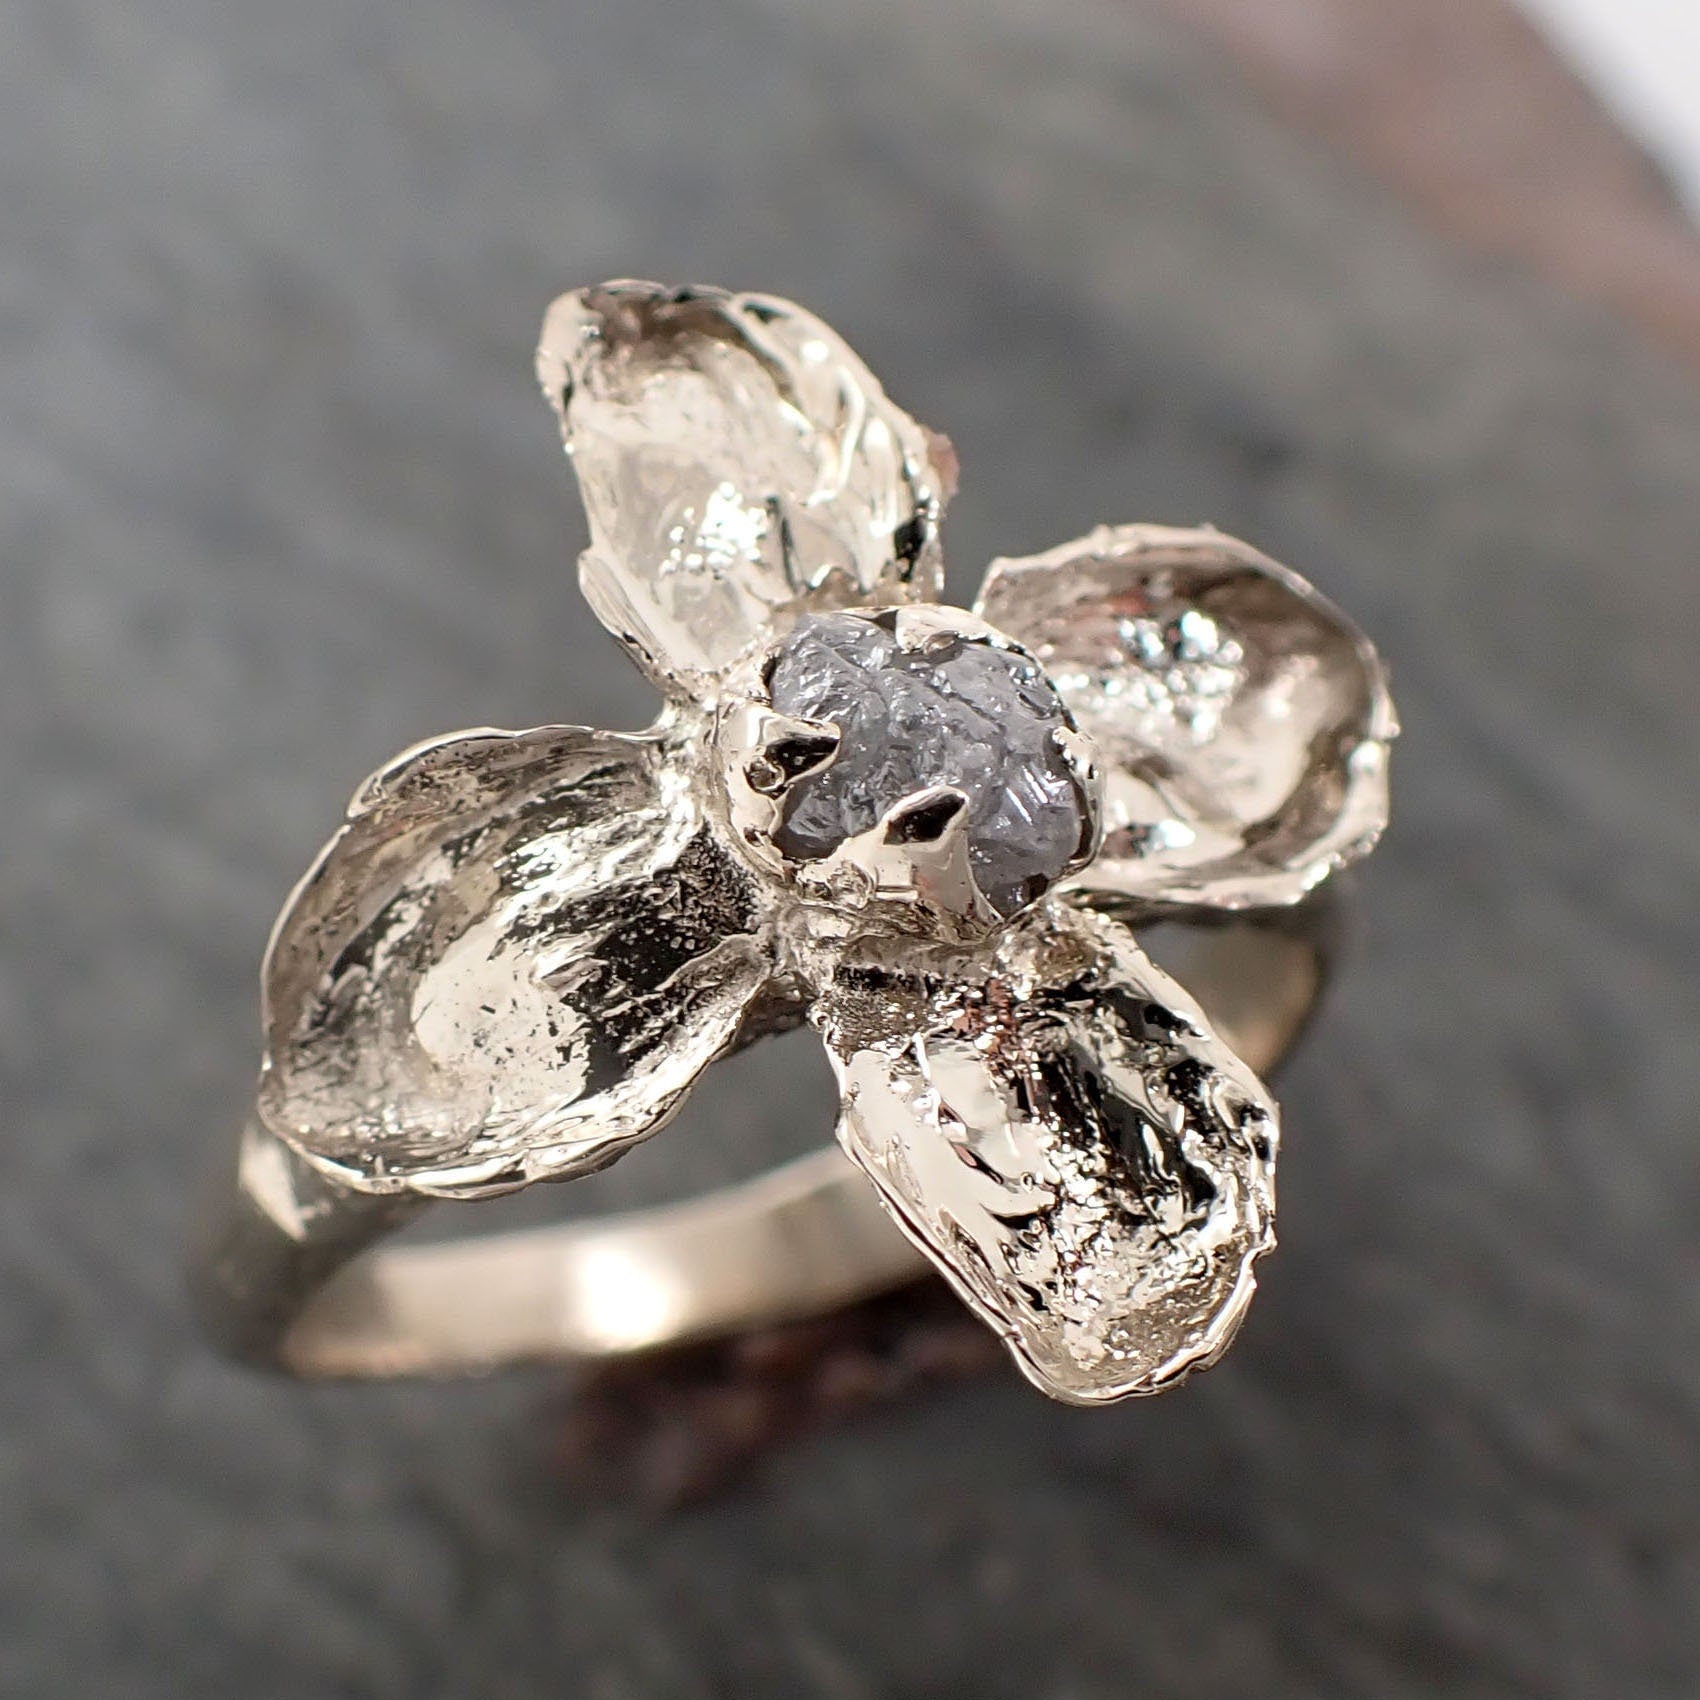 Crystal White Blossom Rings Gold